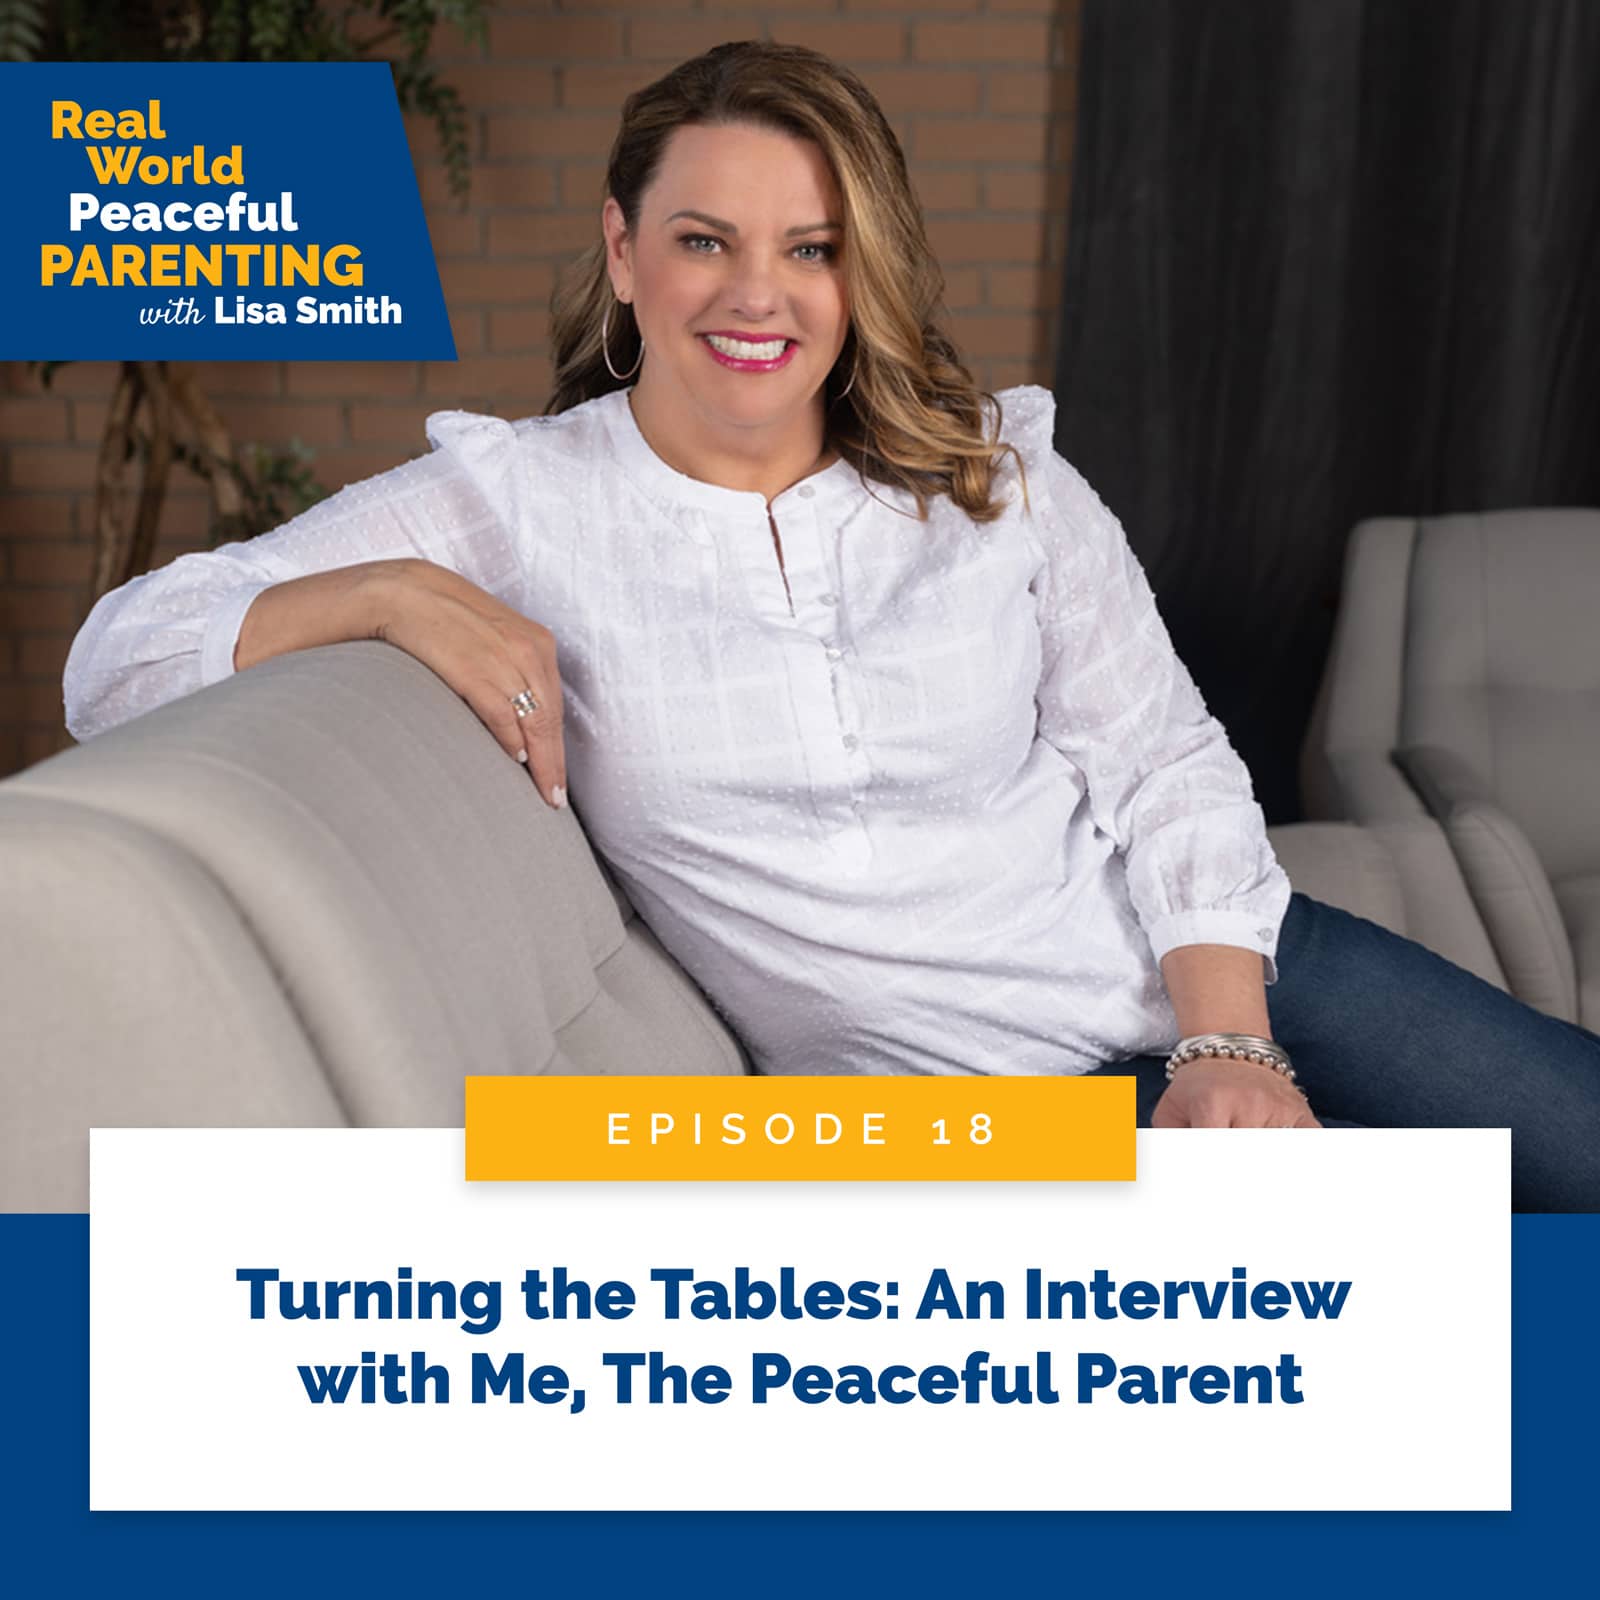 Real World Peaceful Parenting with Lisa Smith | Turning the Tables: An Interview with Me, The Peaceful Parent